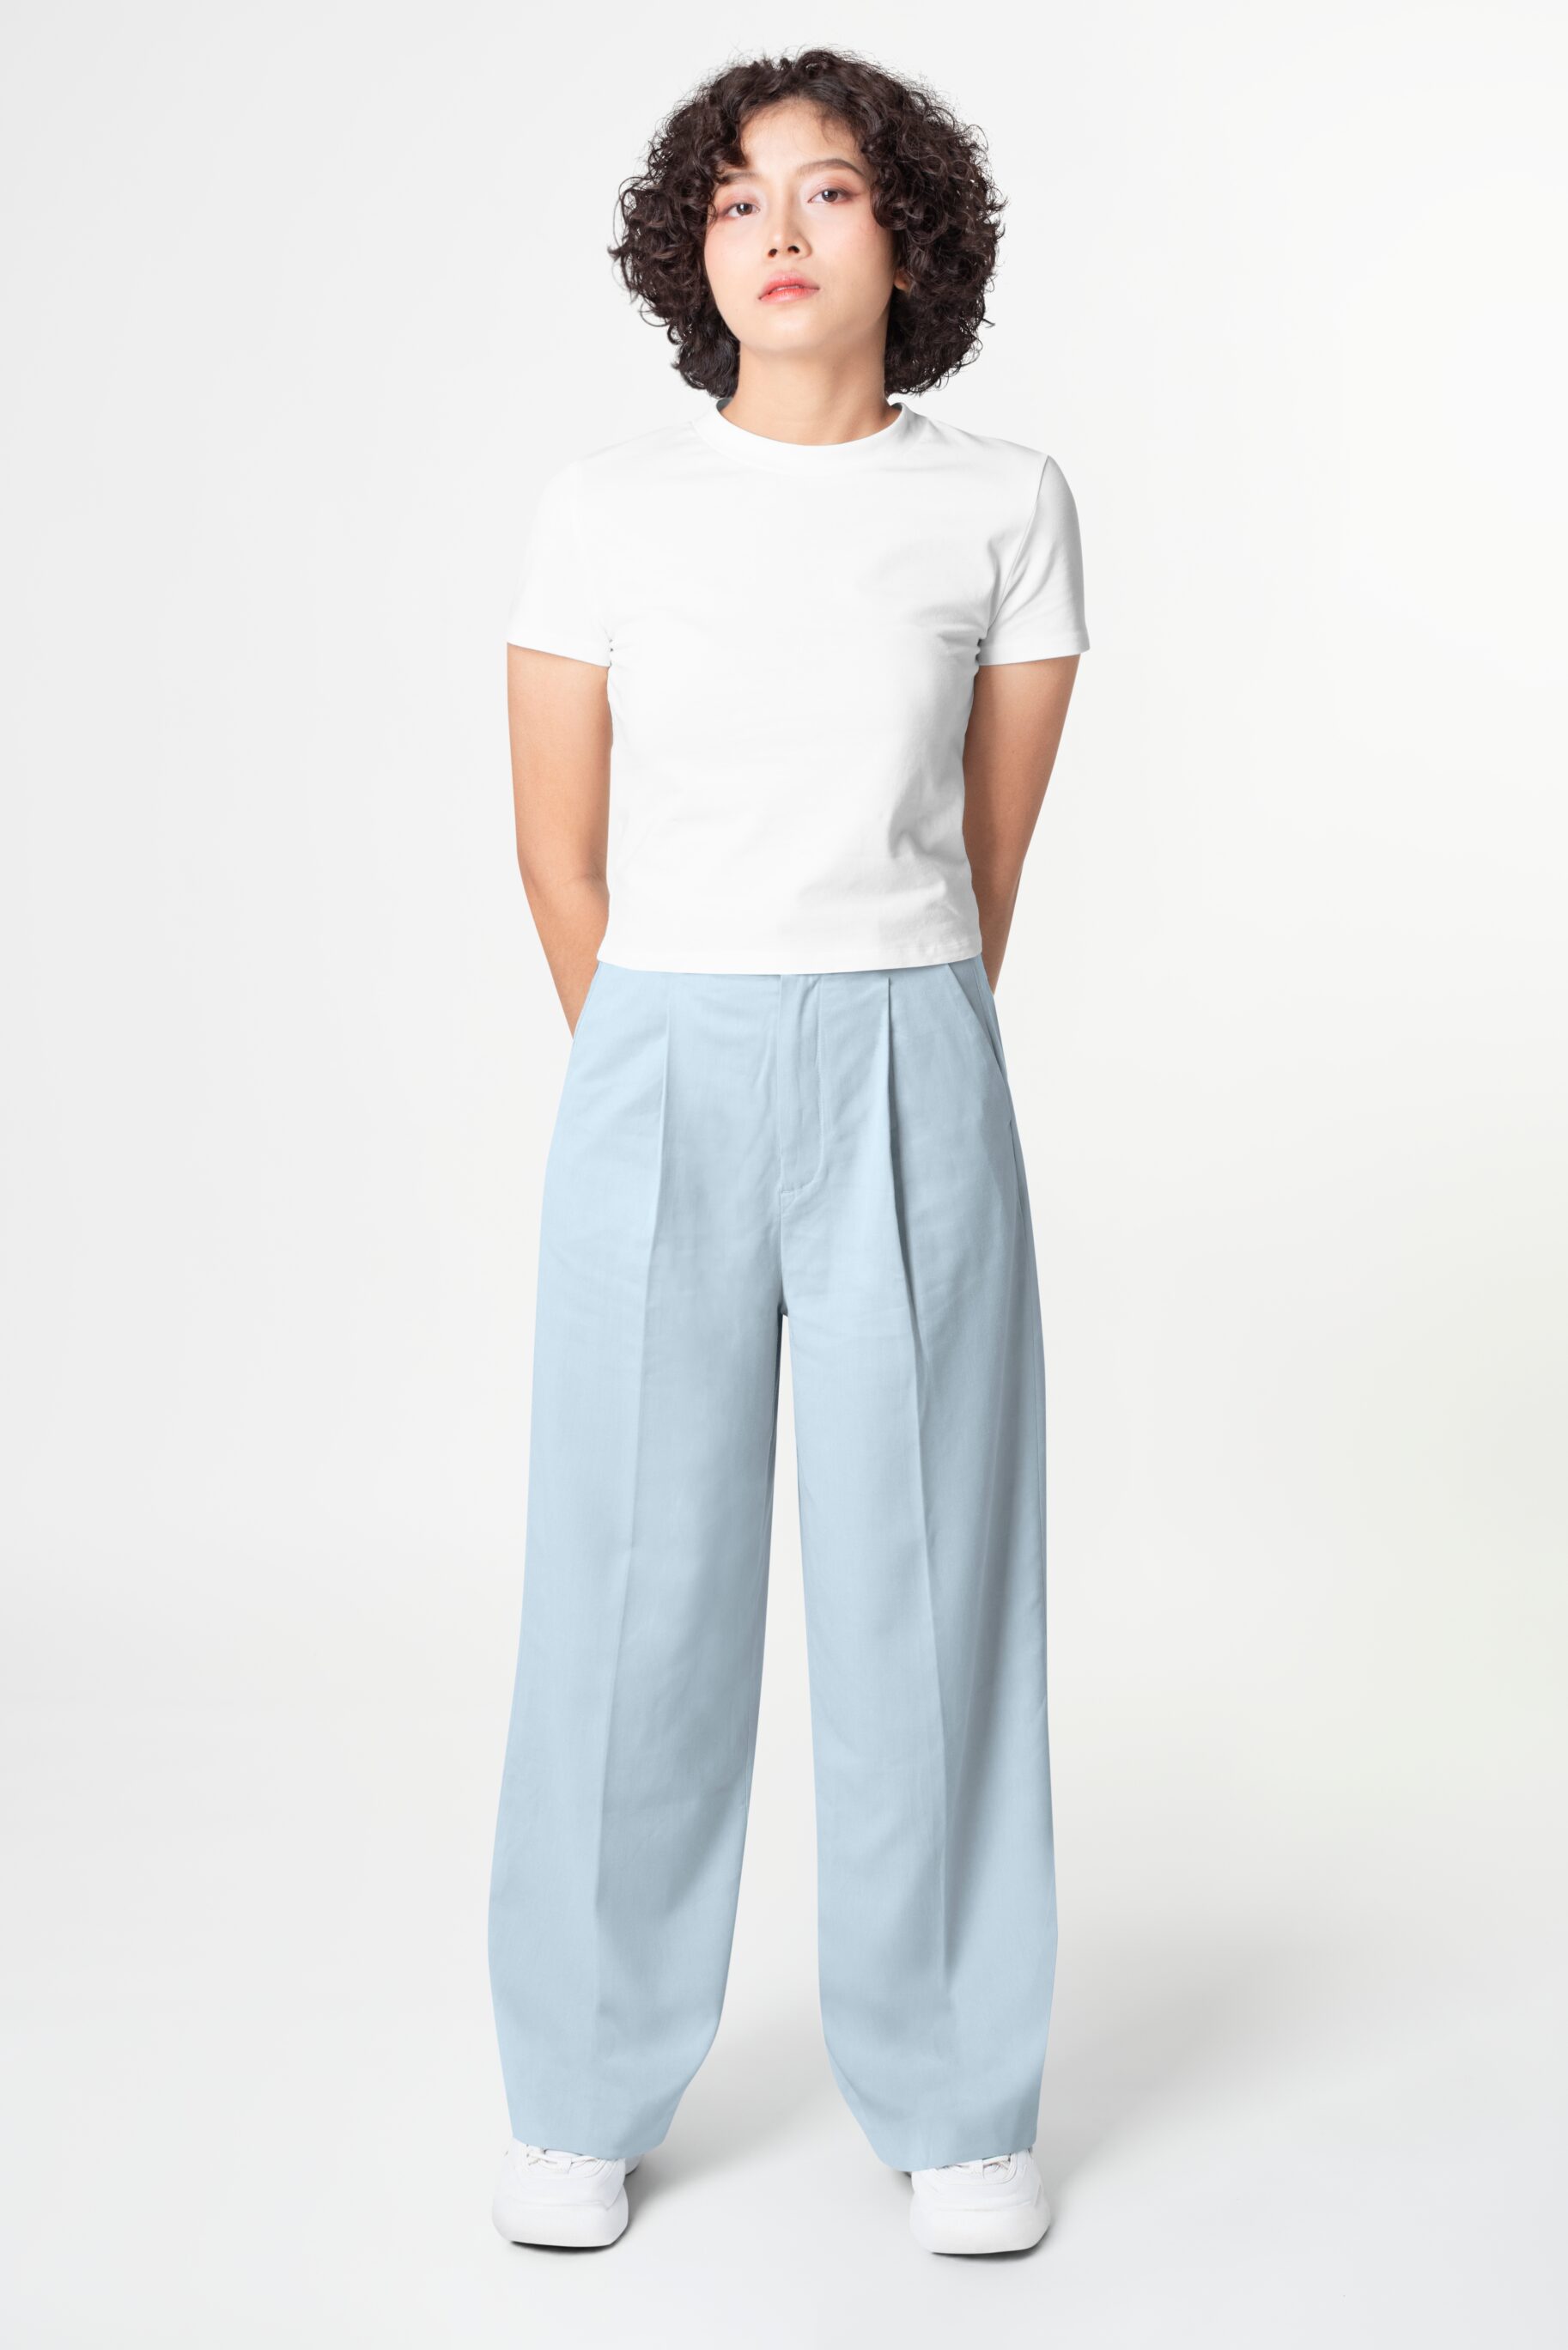 A Simple T-Shirt And Loose Pants